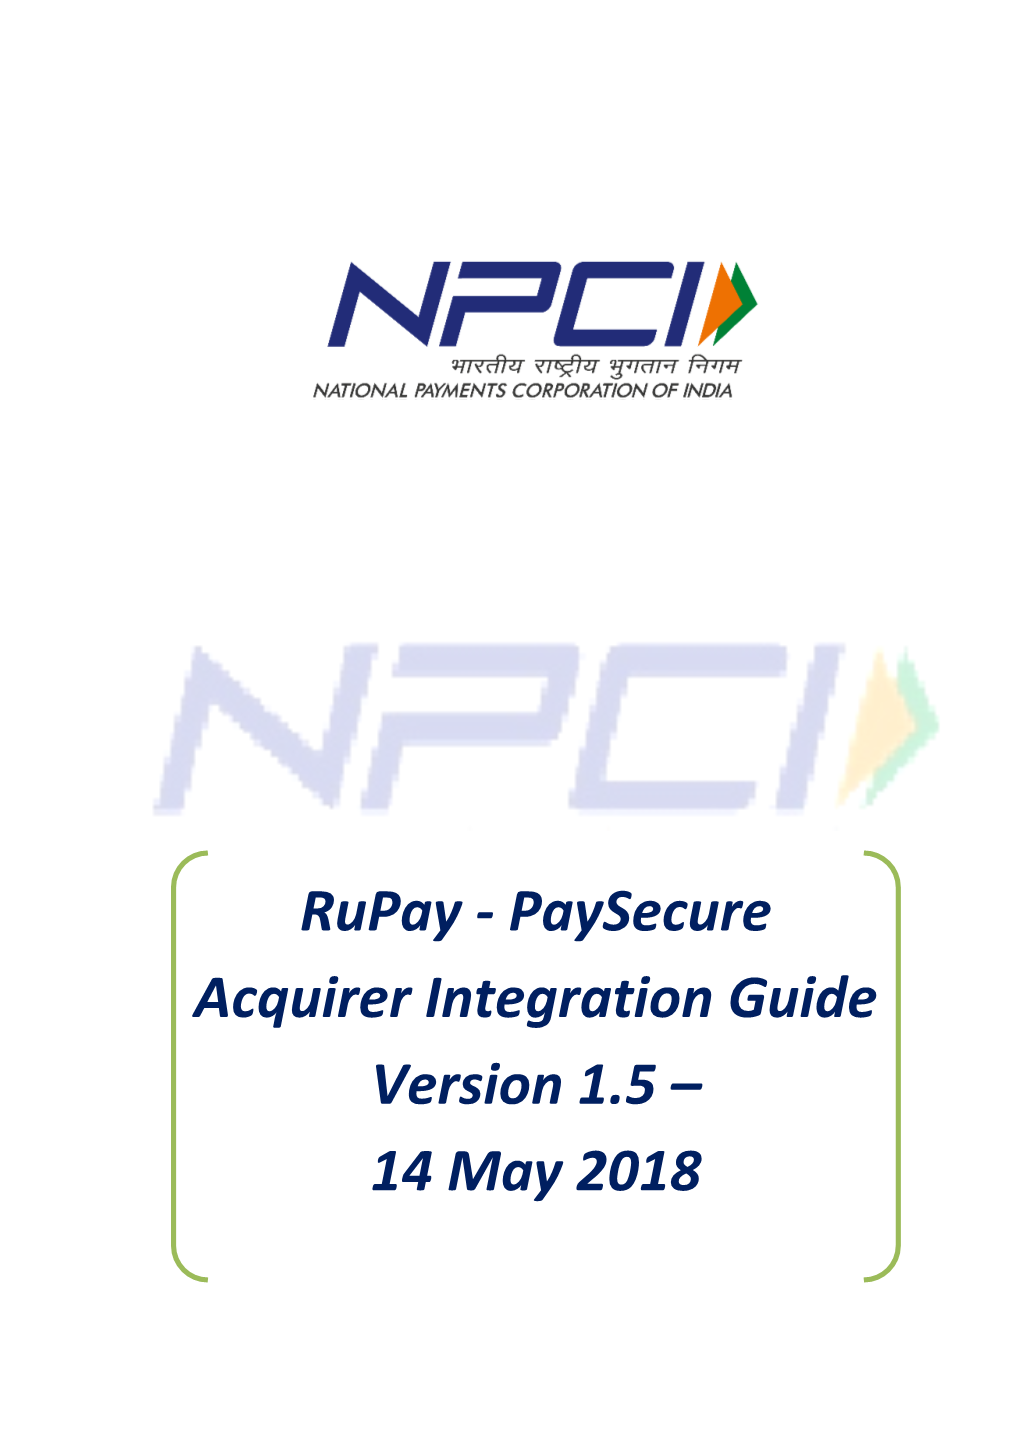 Rupay - Paysecure Acquirer Integration Guide Version 1.5 – 14 May 2018